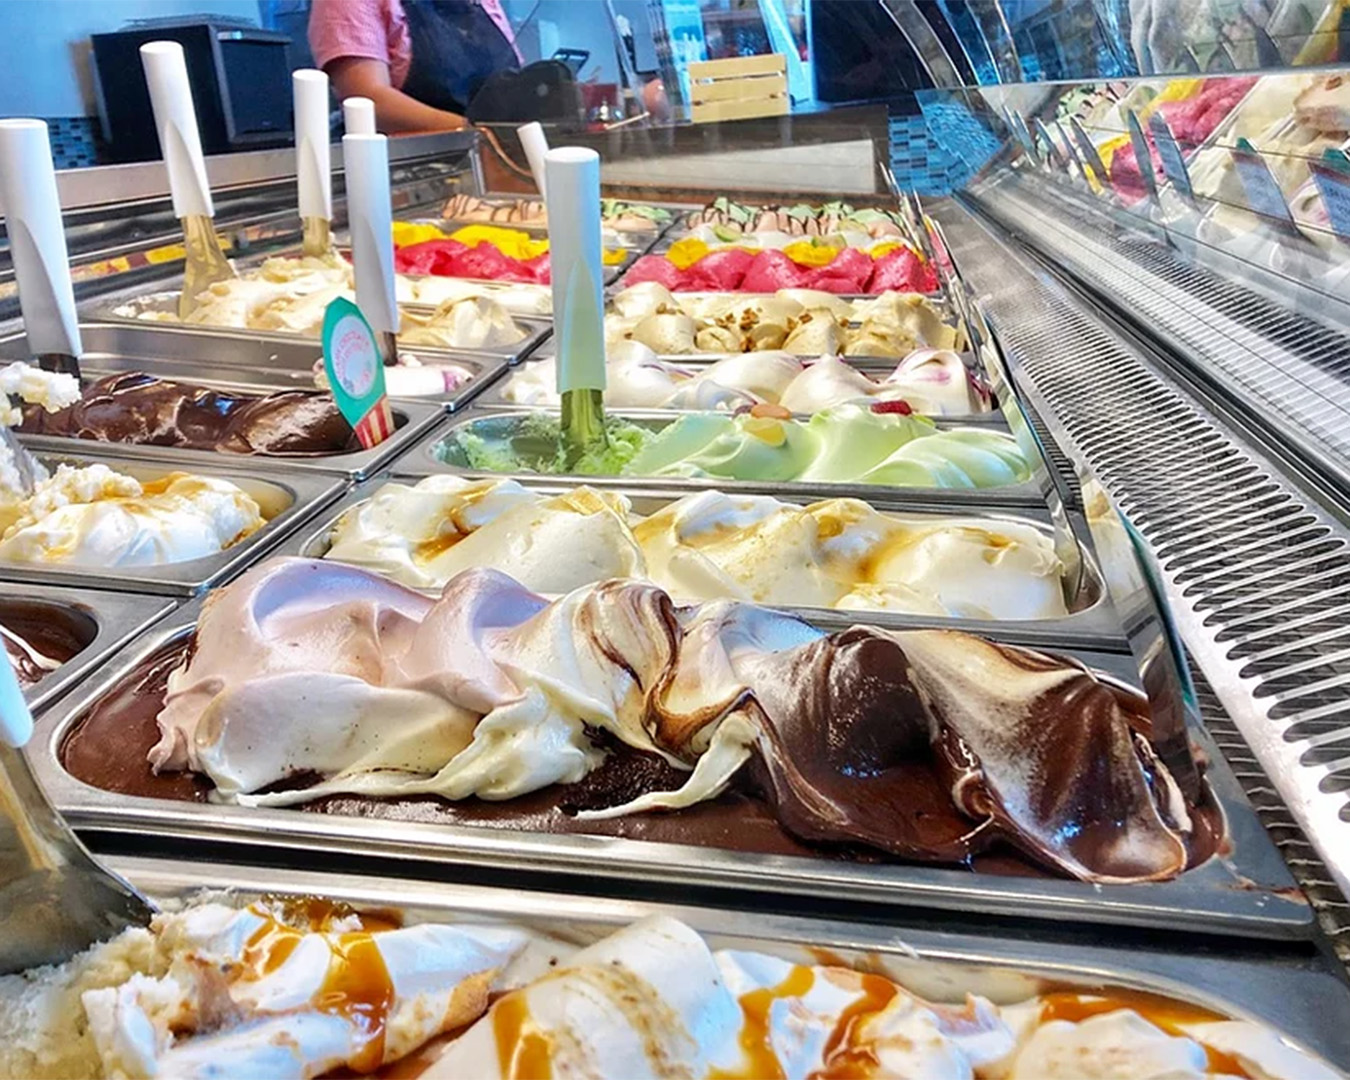 Delicious ice cream served up at Gelissimo Gelateria.